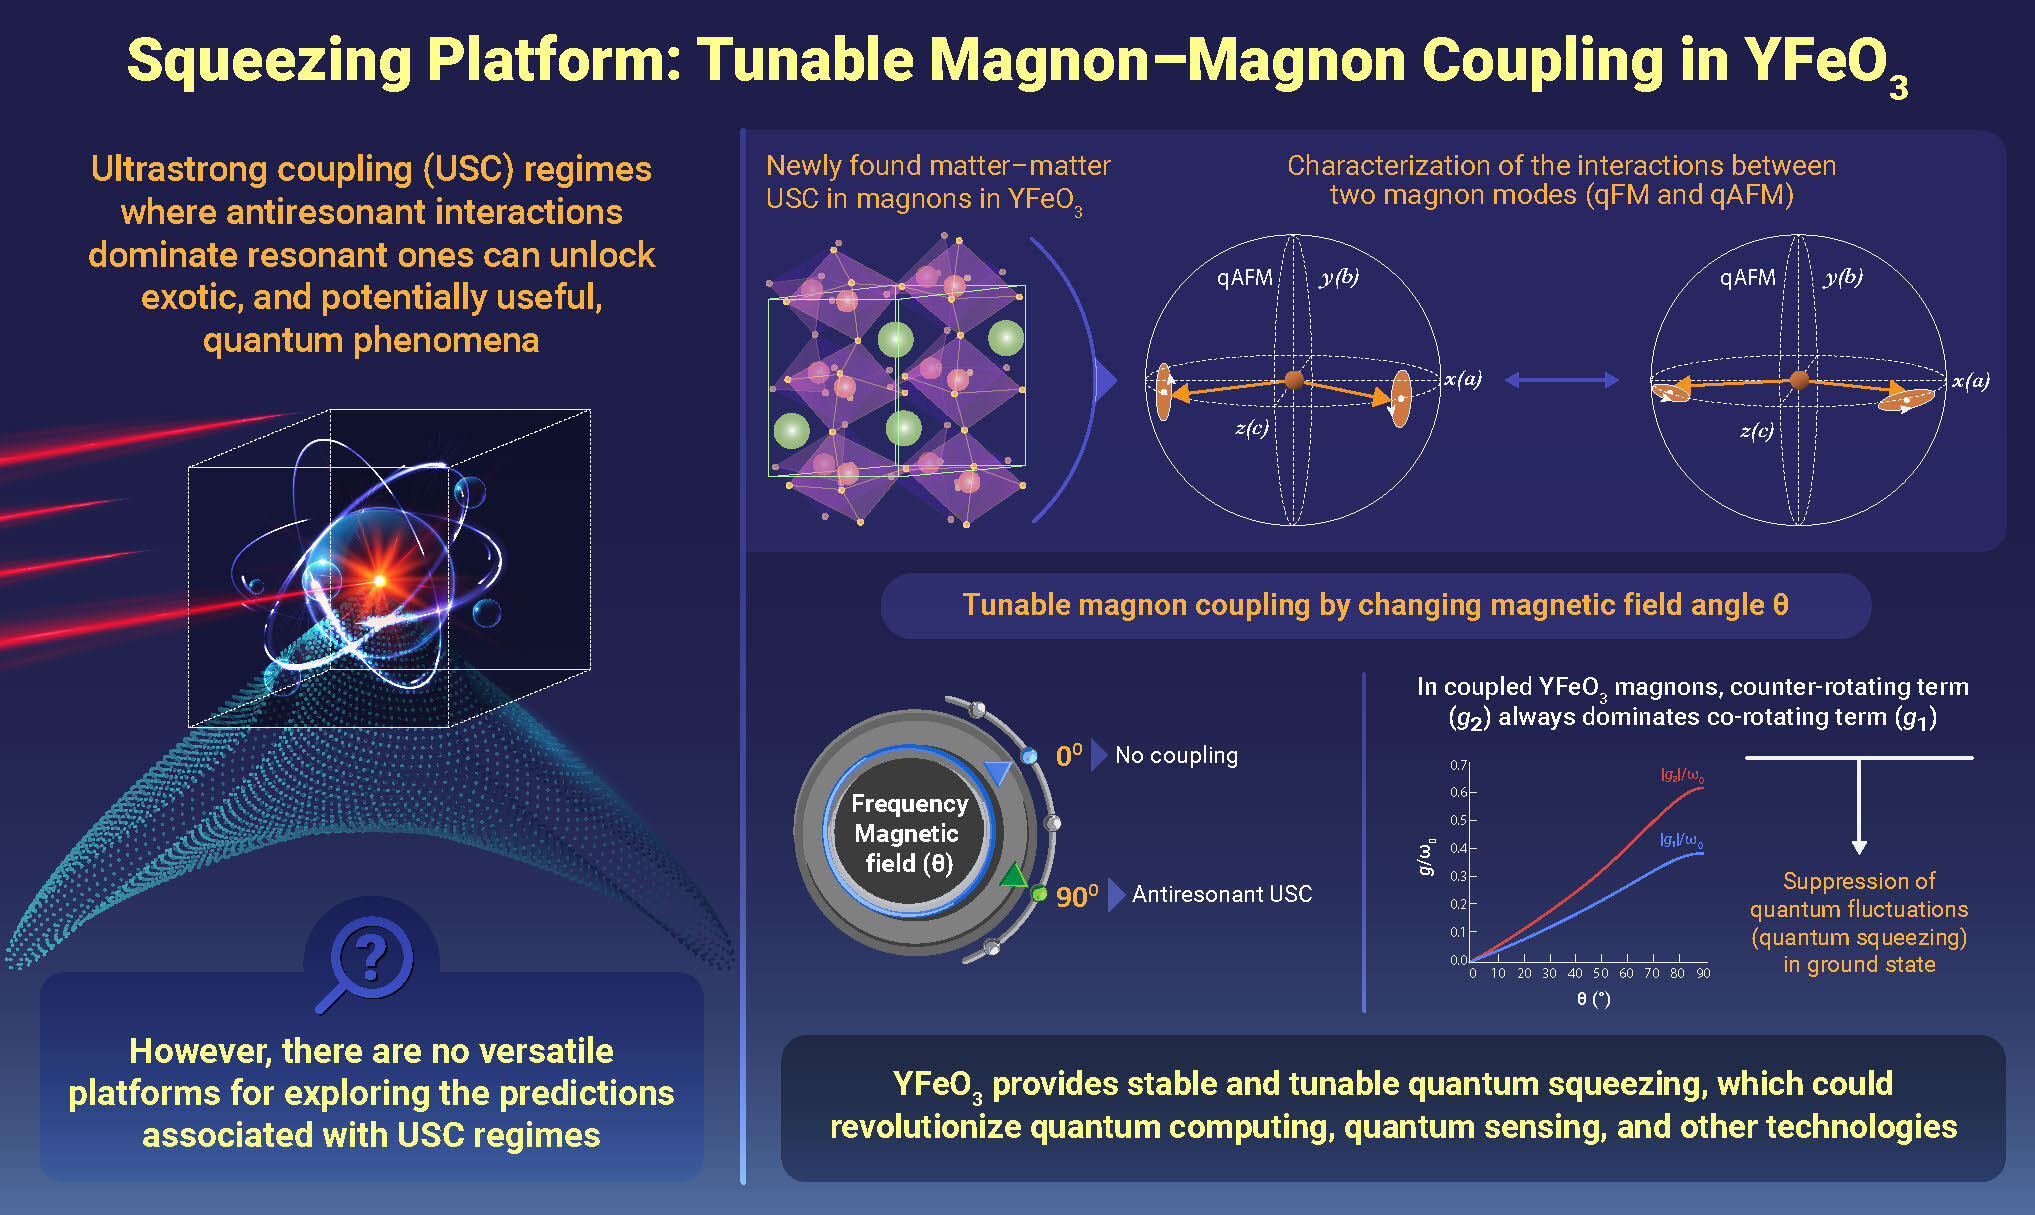 Rice physicists' RAMBO reveals magnetic phenomenon useful for quantum simulation and sensing